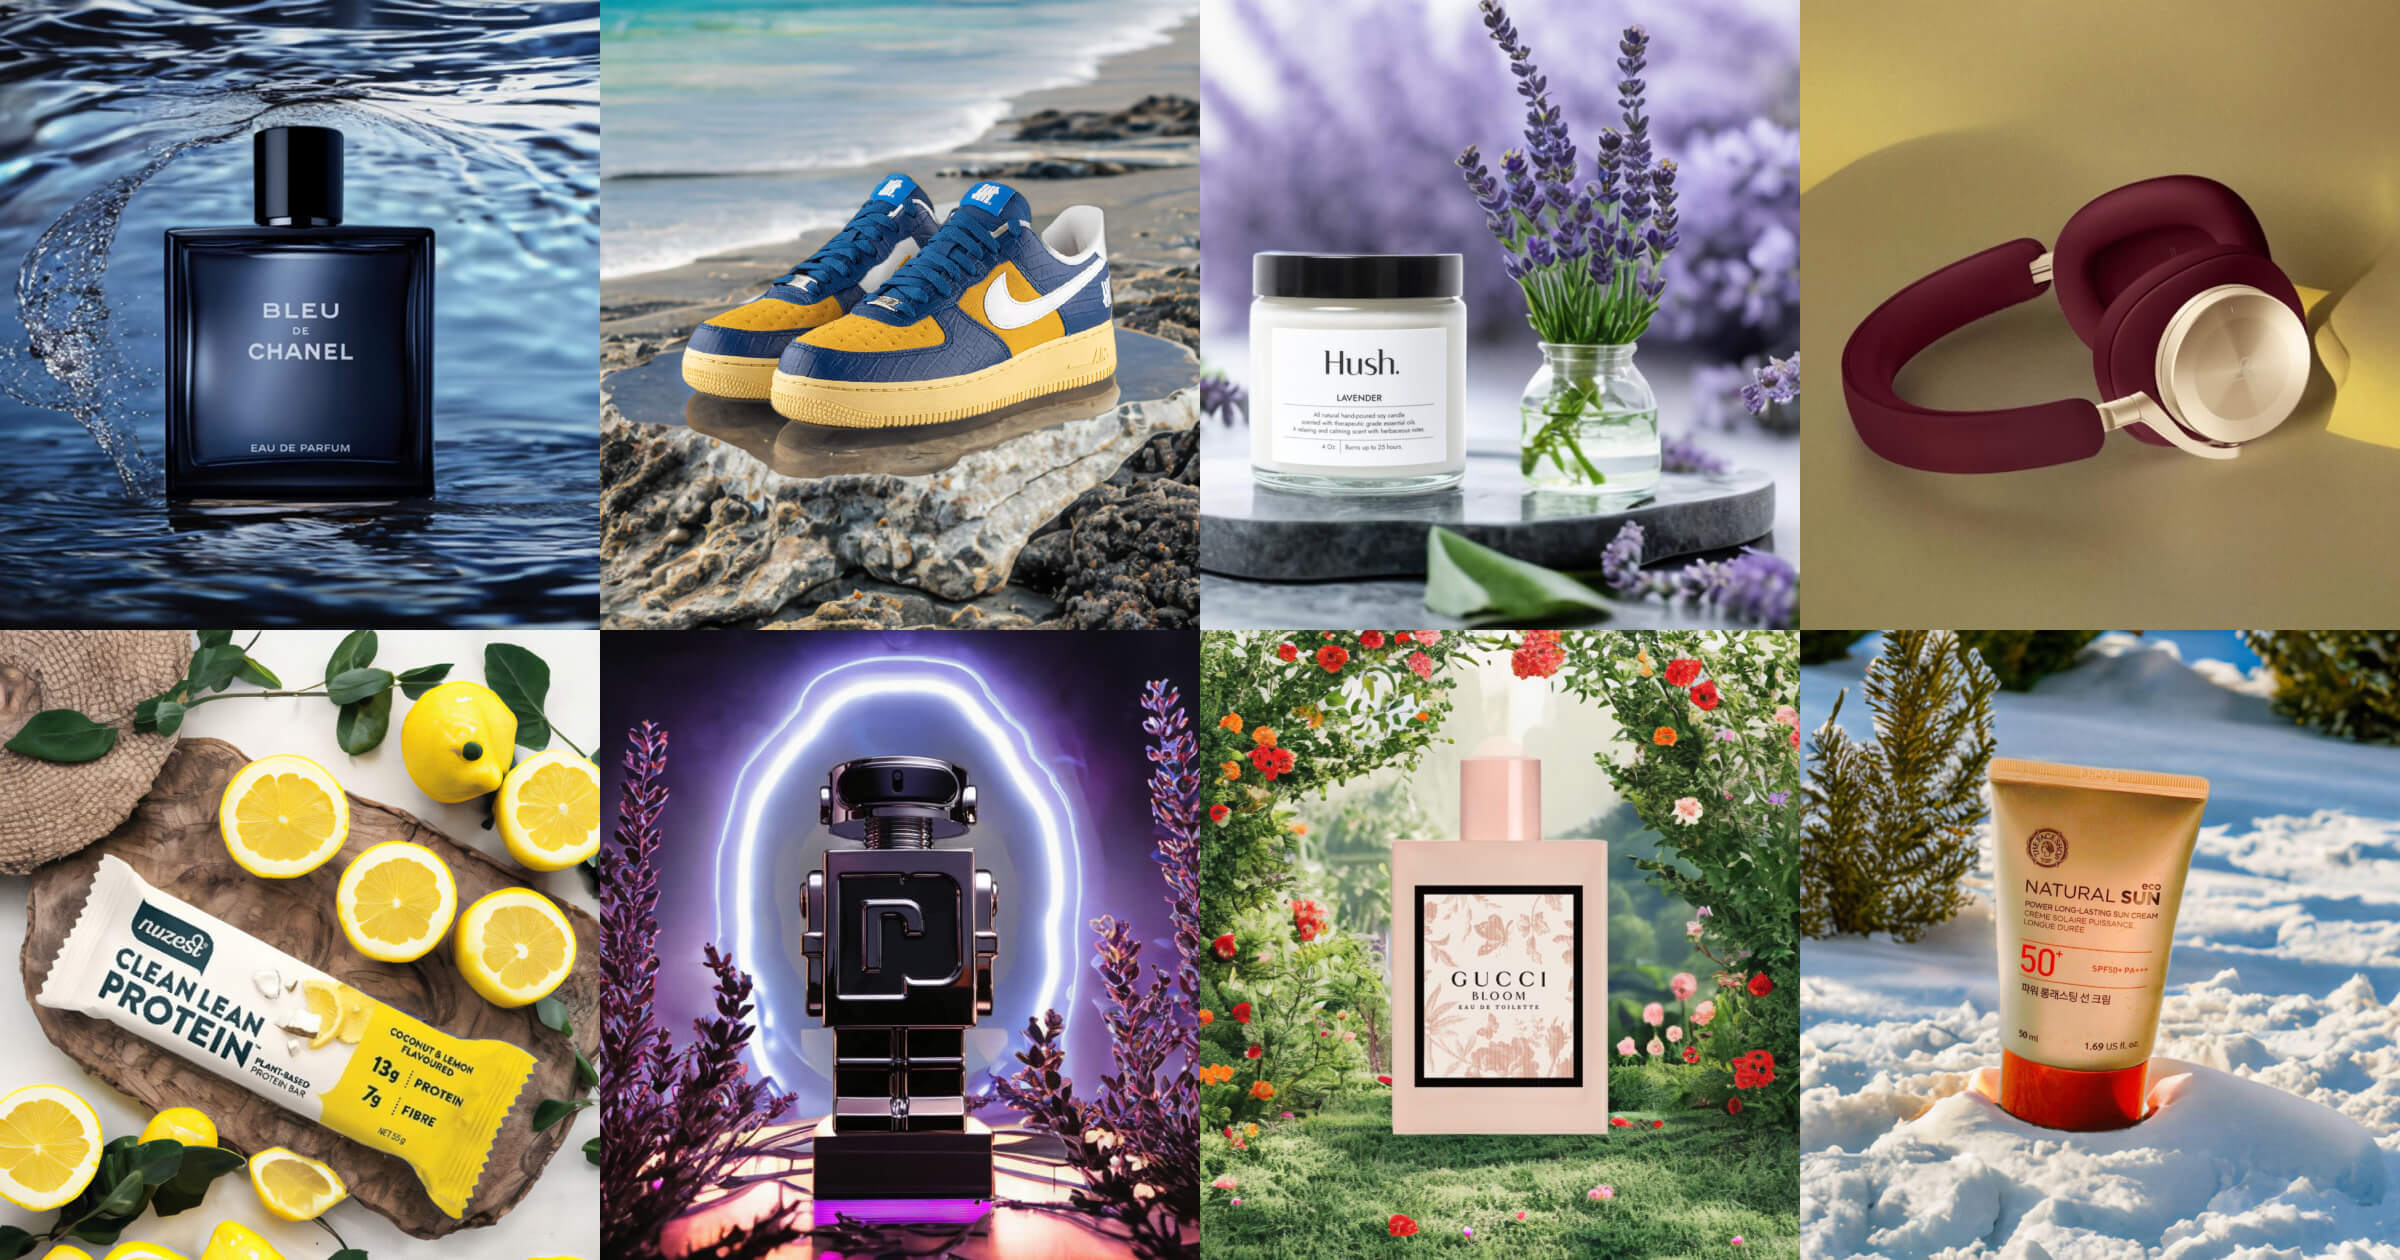 A collage of product images generated by Pebblely